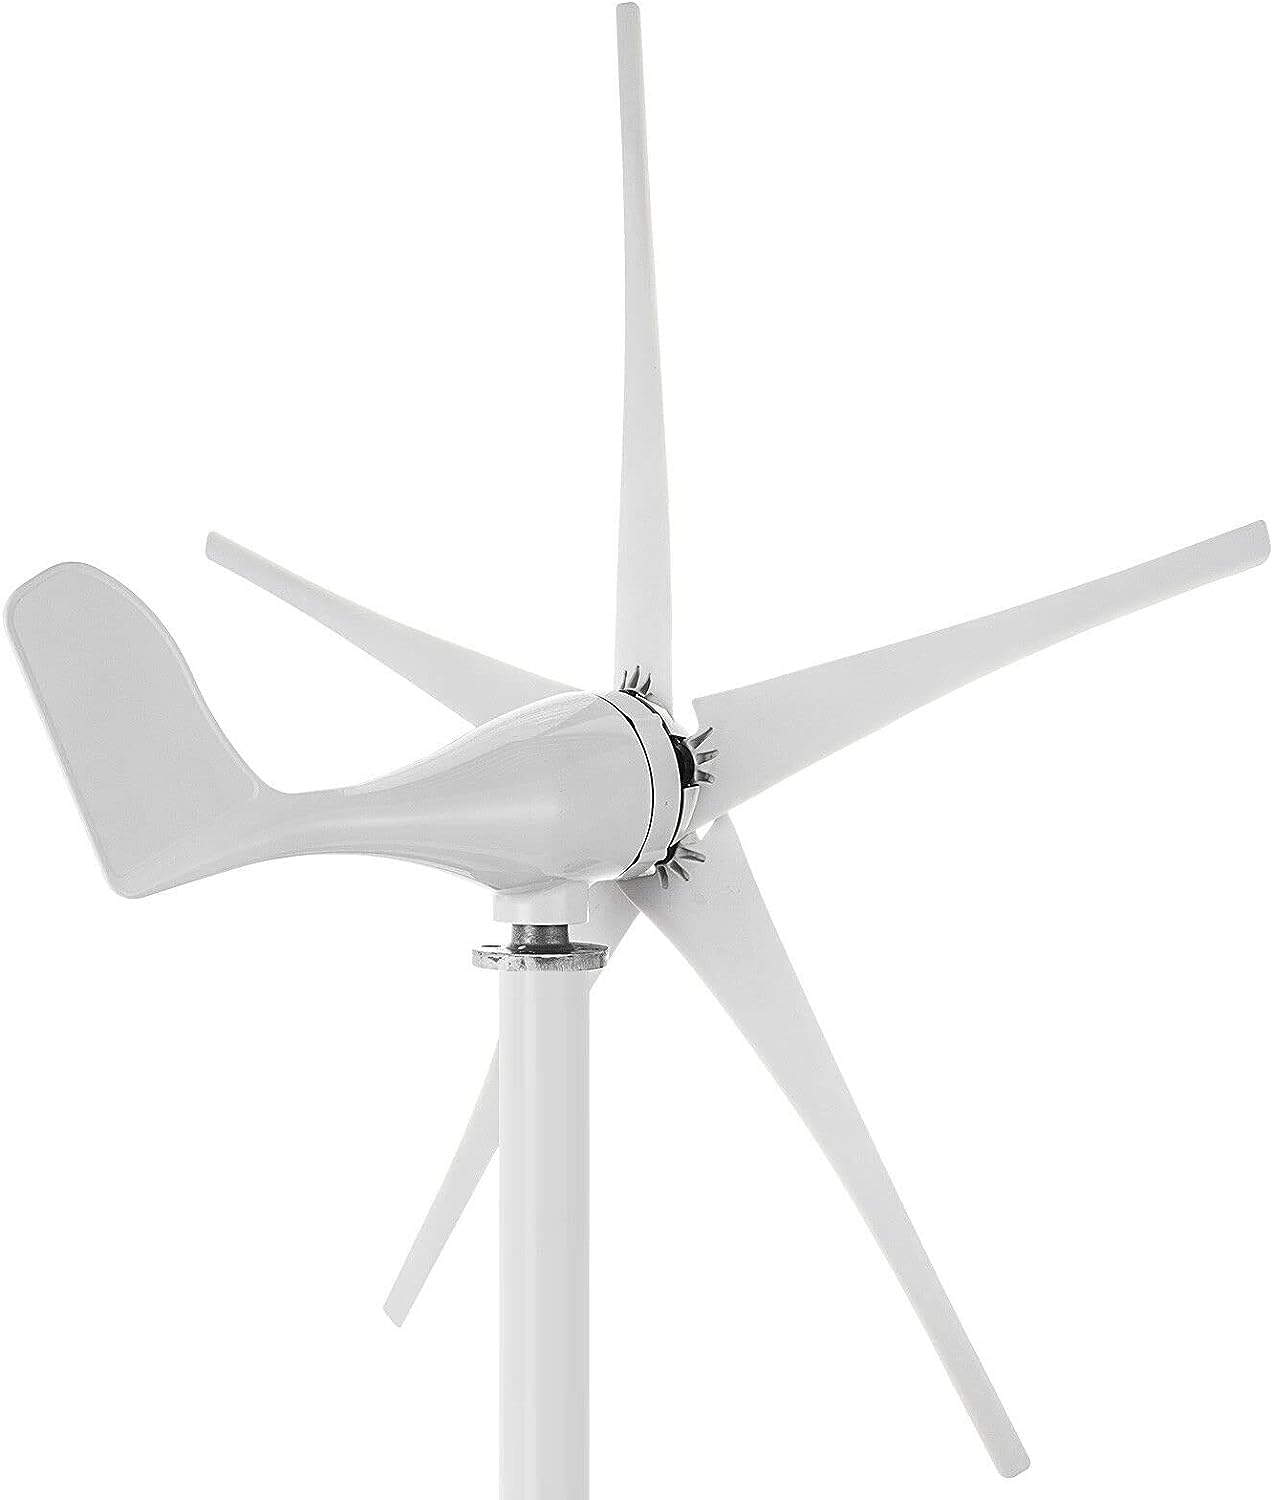 Wind Turbine, RX-400H5, 800W, 5 Blades, Free MPPT Controller Stainless Steel, White